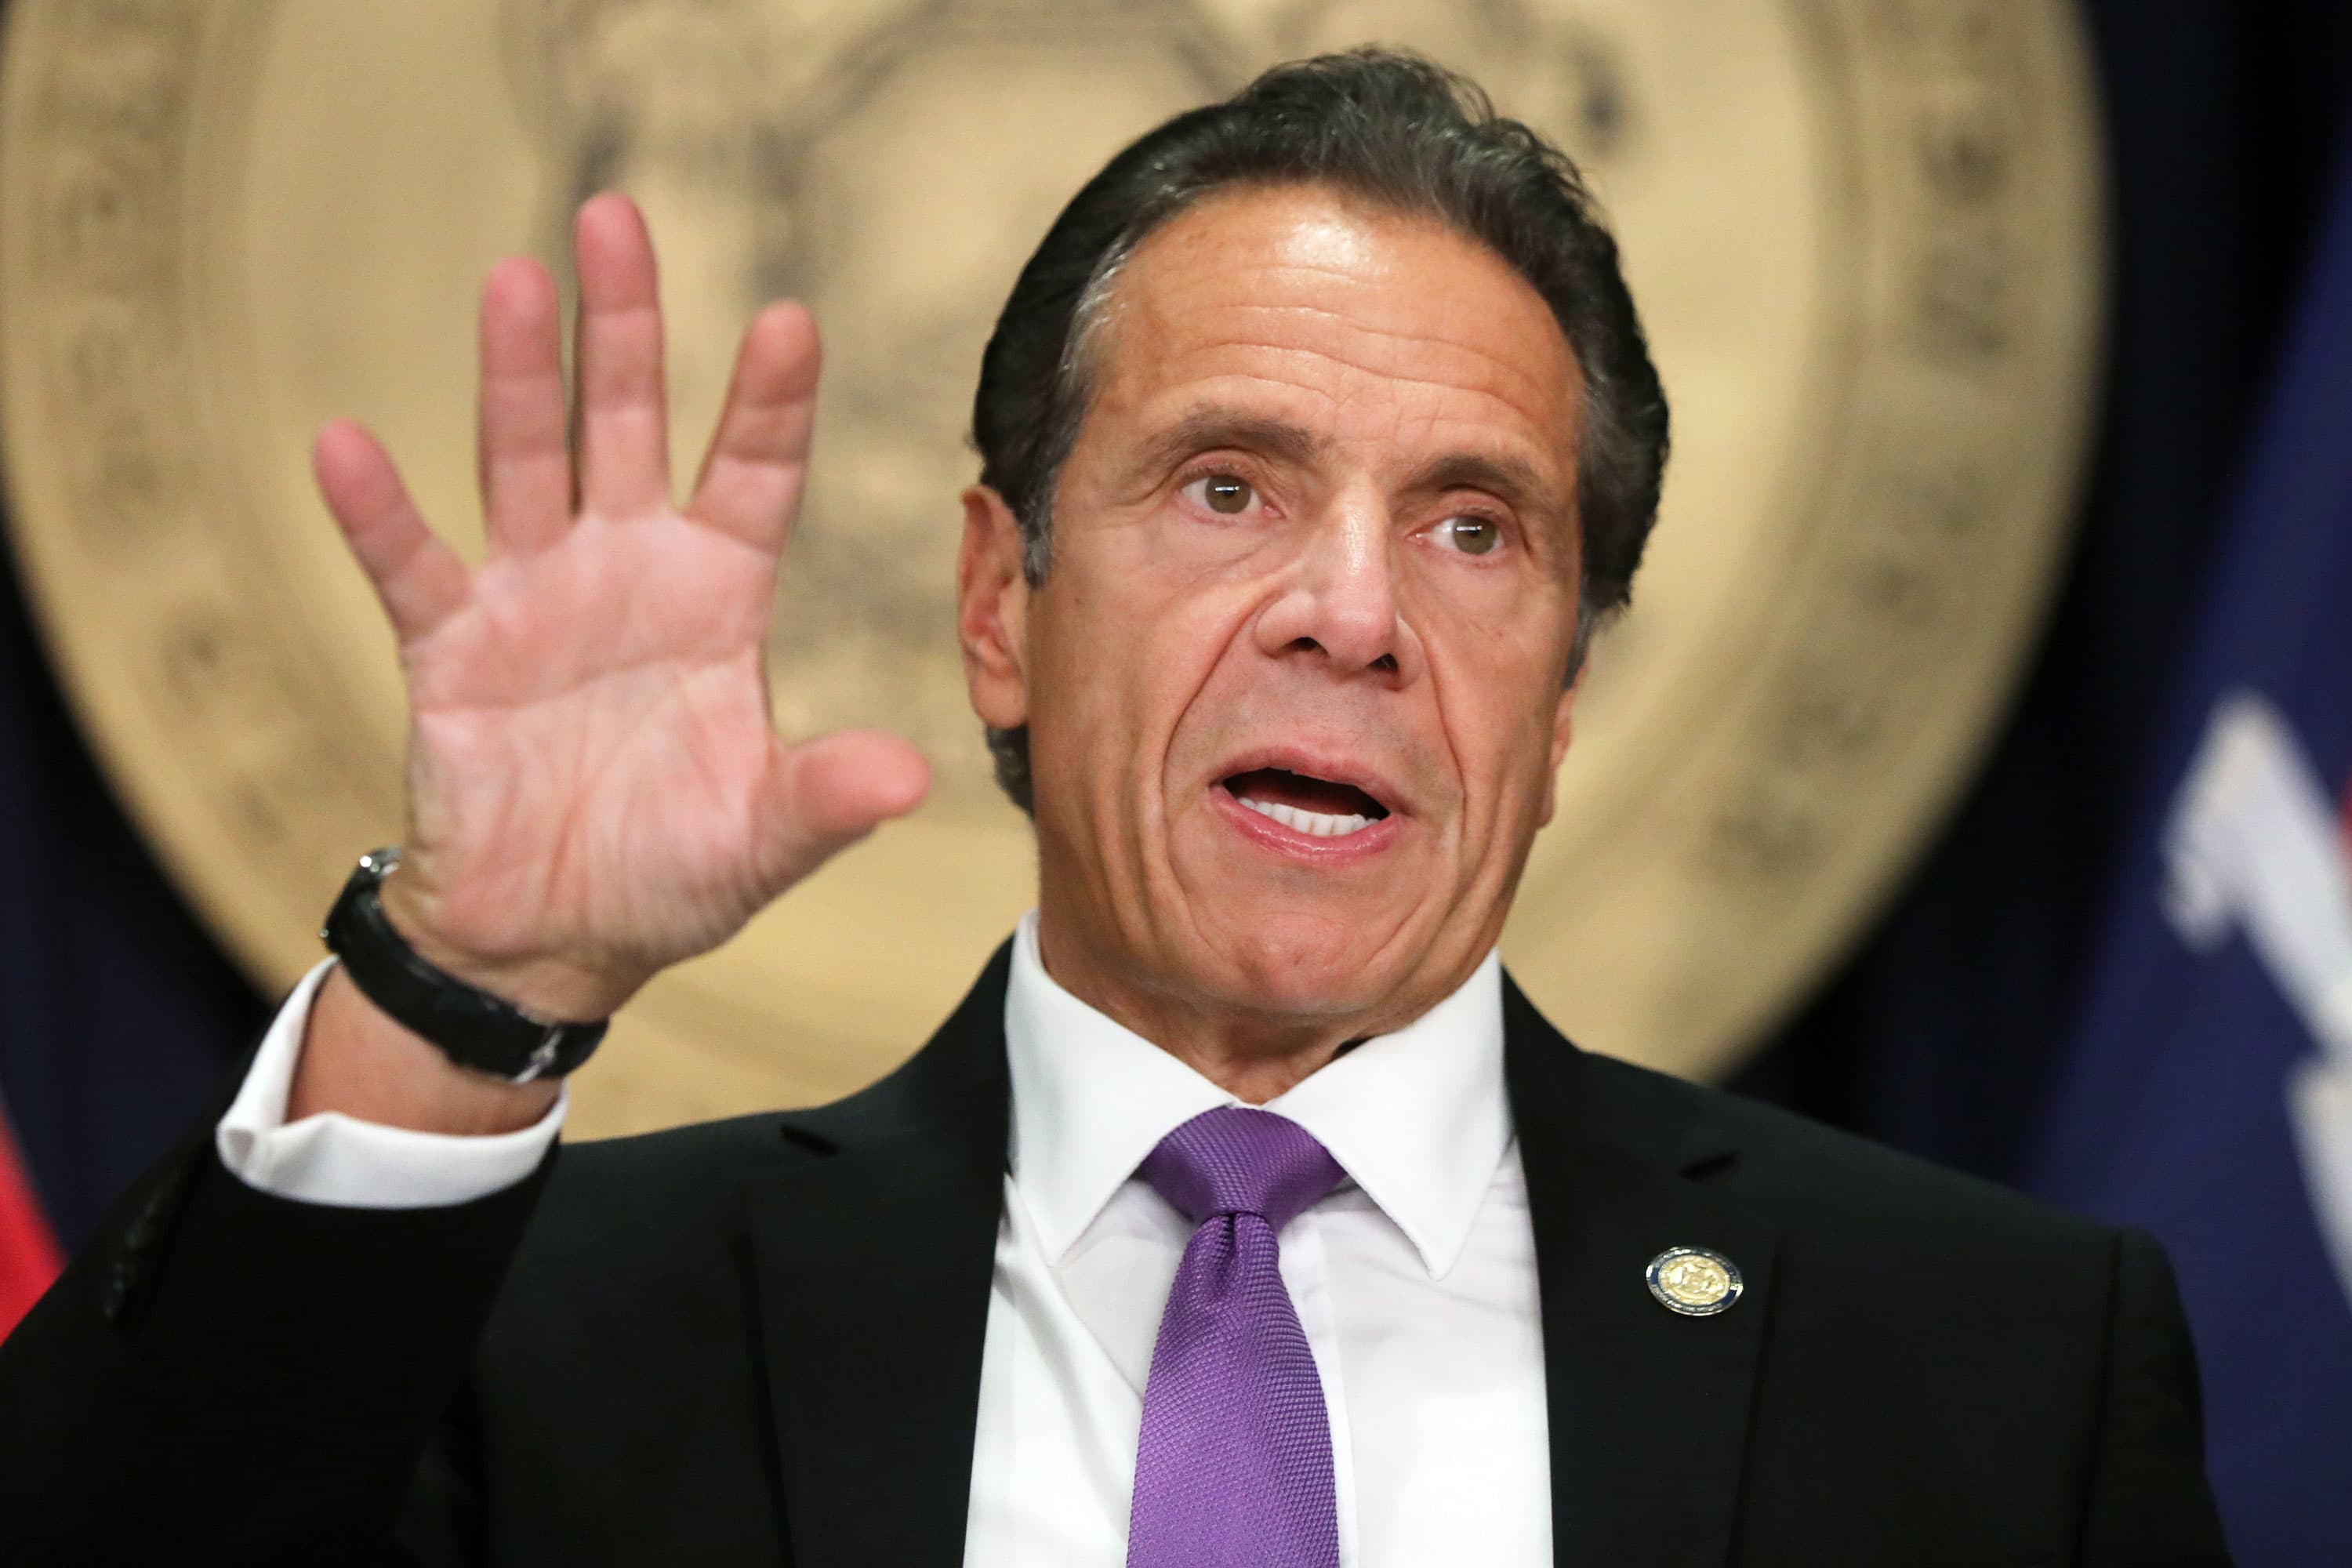 New York is investigating potential fraud against the Covid vaccine, says Cuomo